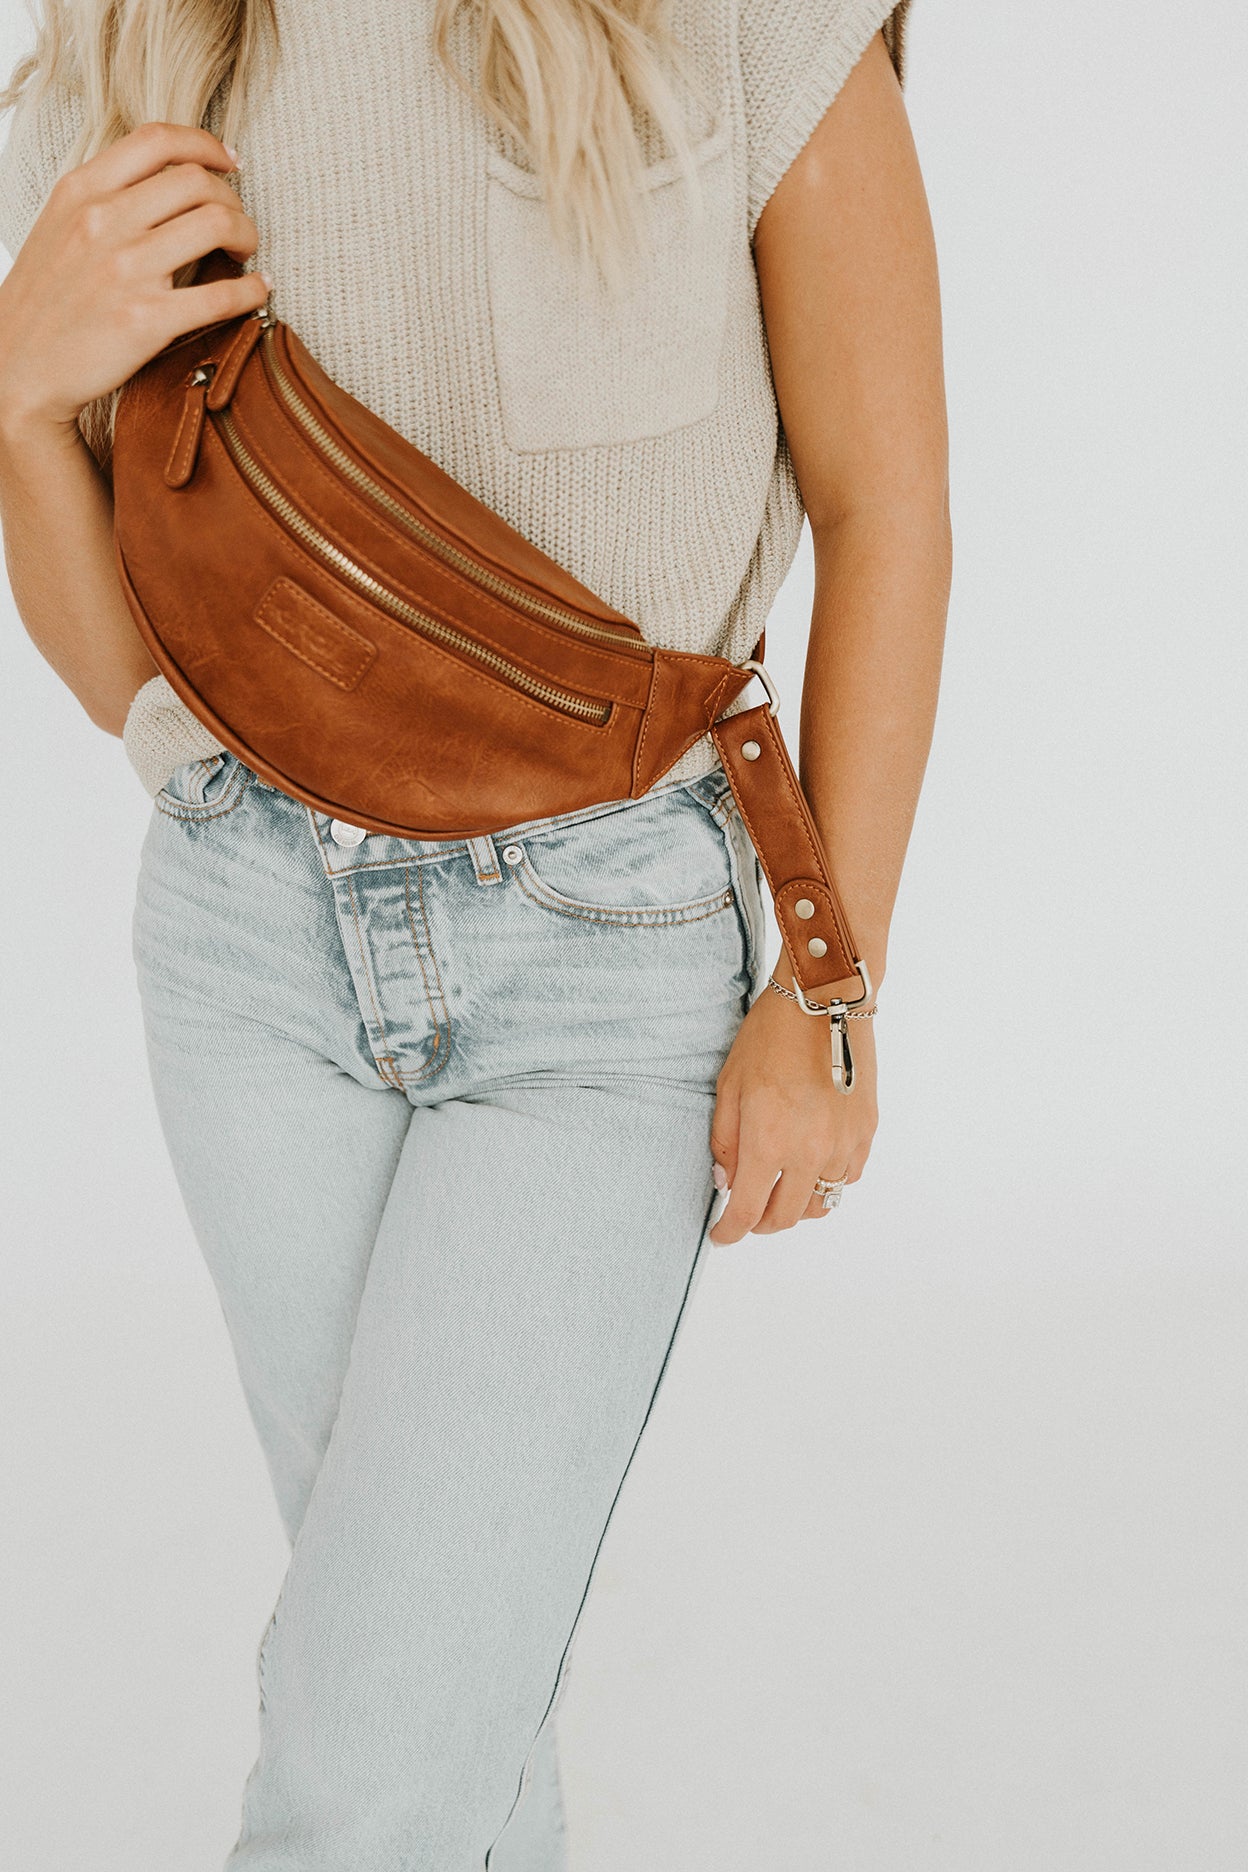 Tan Bum Bag Fanny Pack Leather Fanny Bag Smooth Leather 